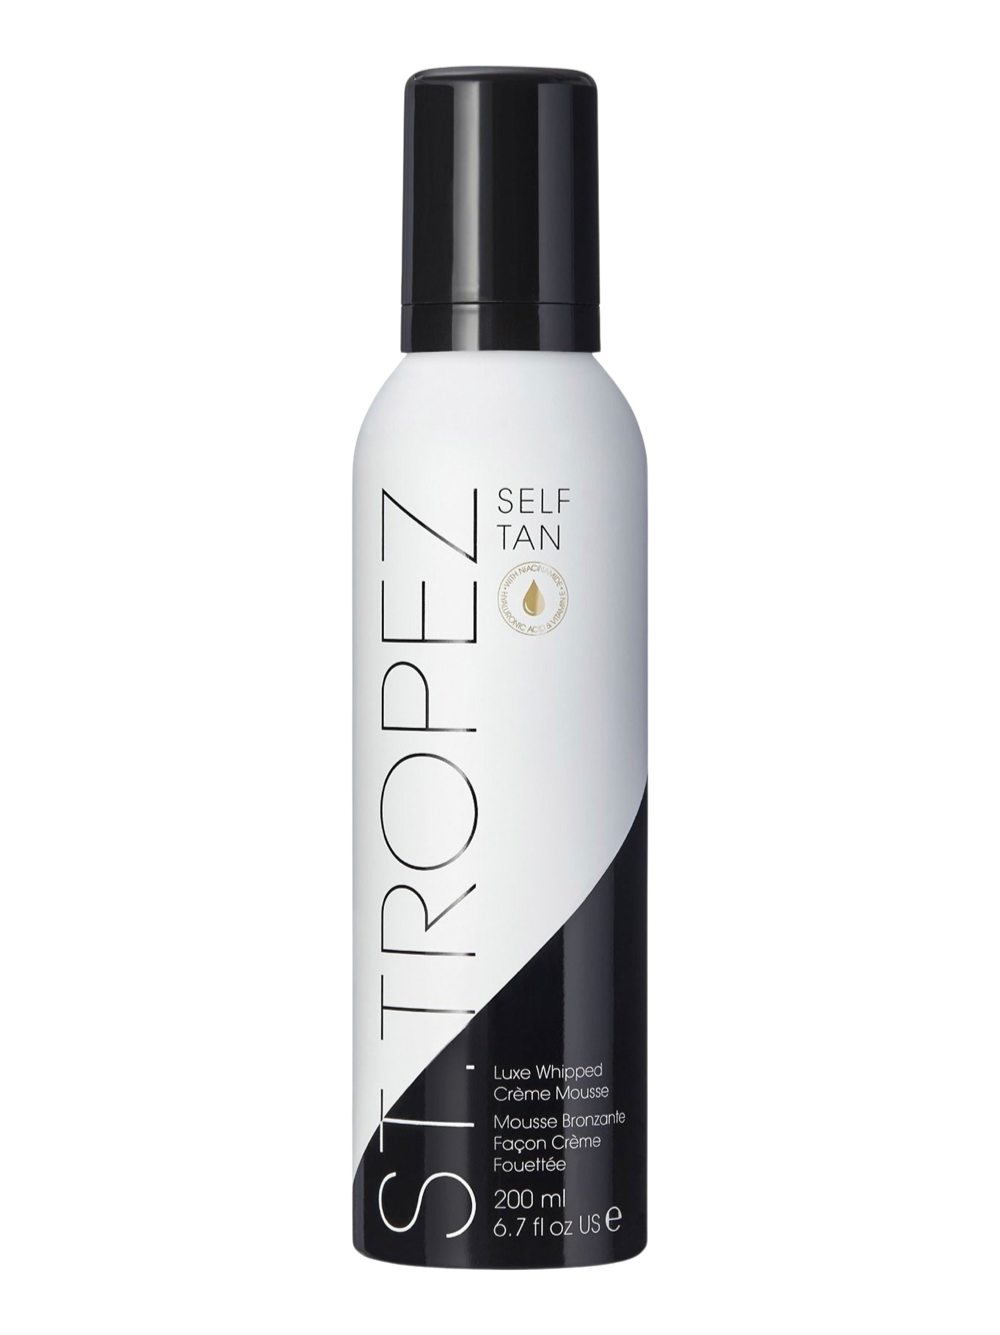 St. Tropez Luxe Whipped Crème Mousse